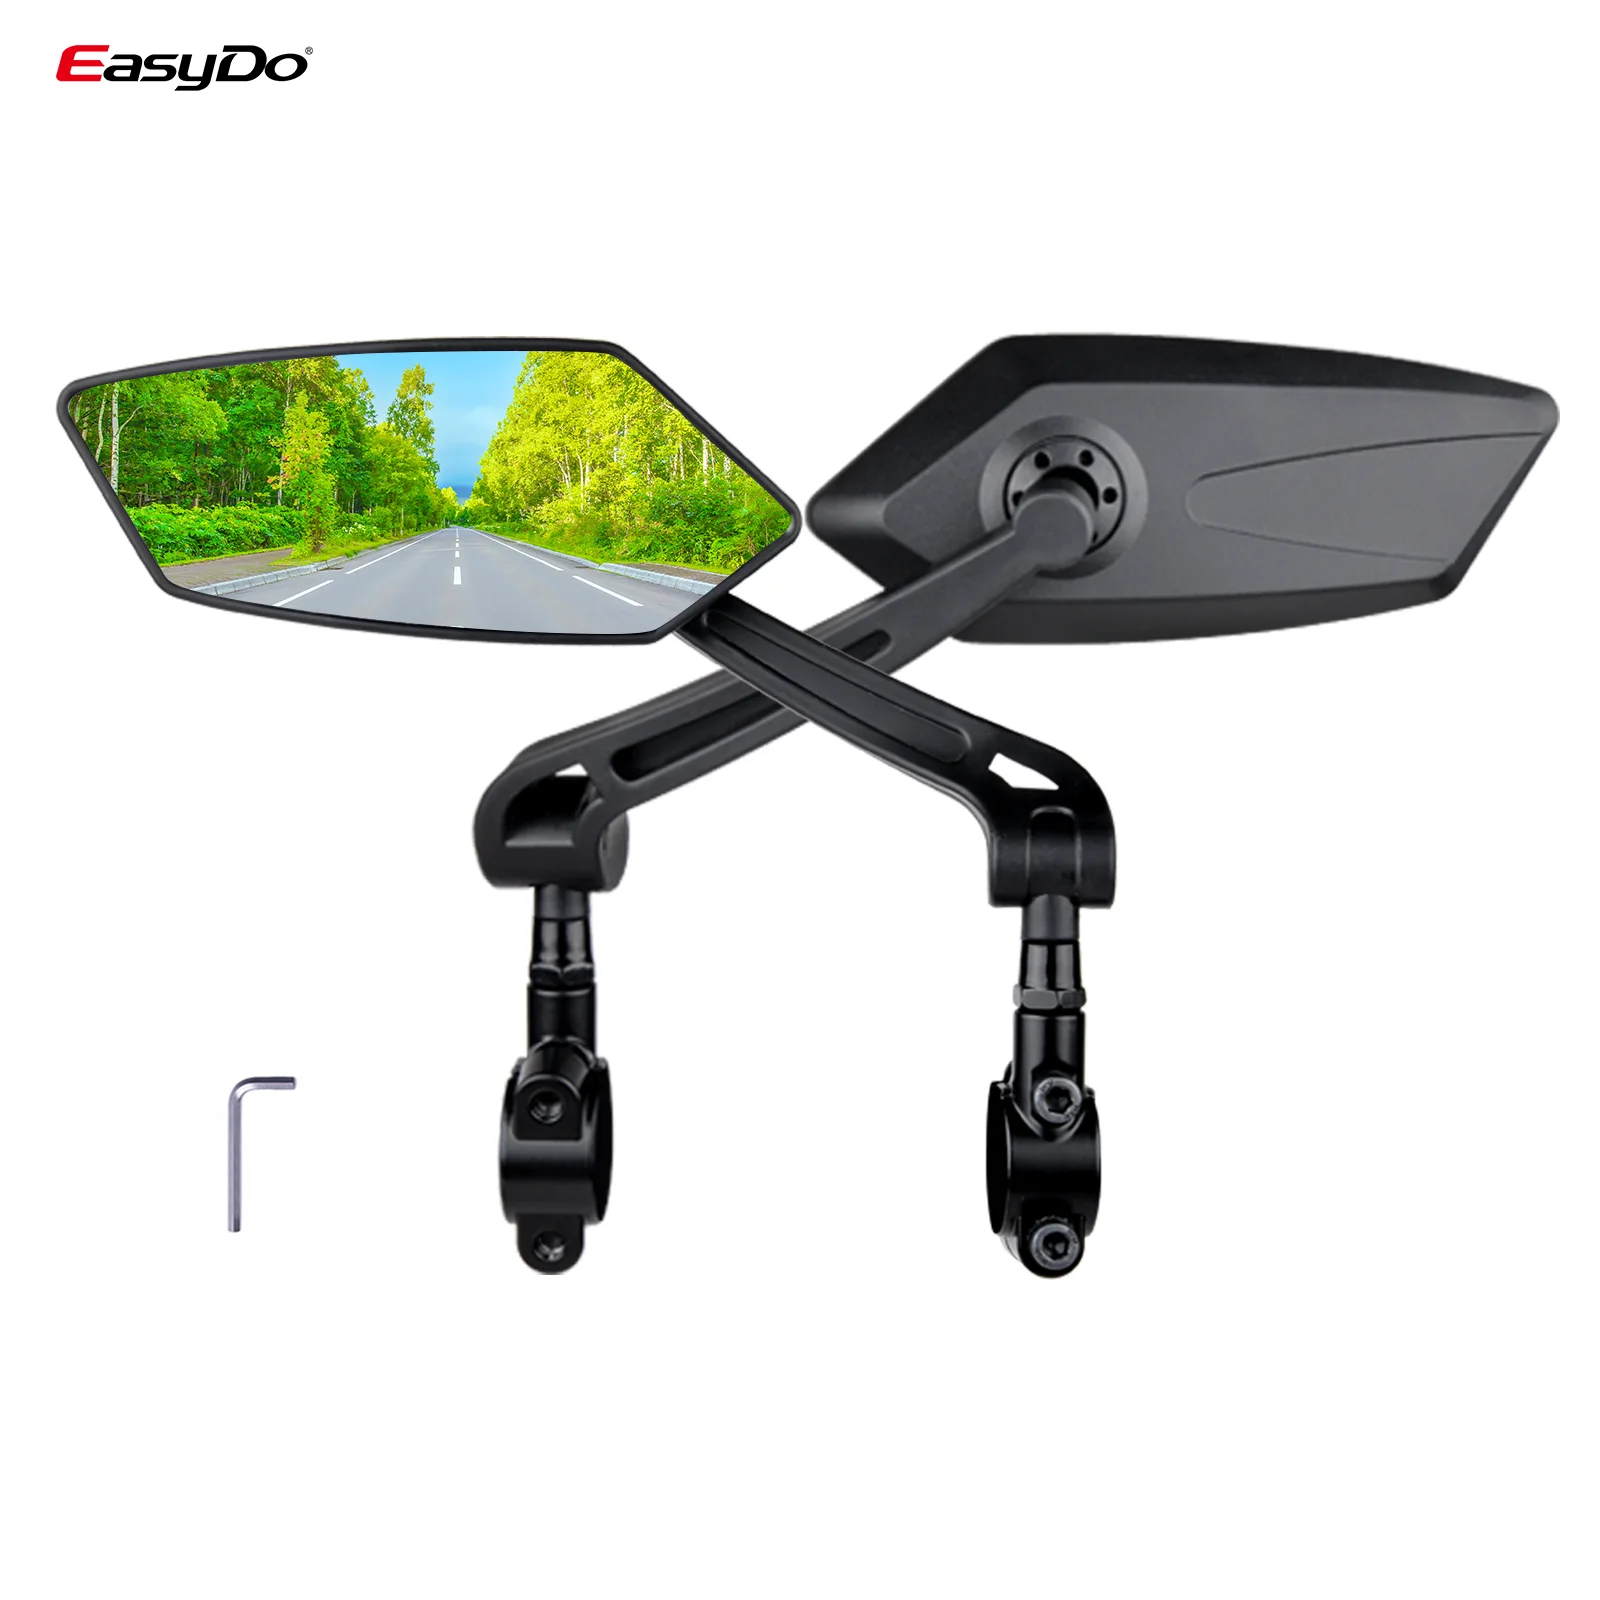 EasyDo Bike Rear View Mirror Wide Range 360 Degree Rotate Reflector for MTB Bicycle Flexible Safety Sight Cycling Accessories